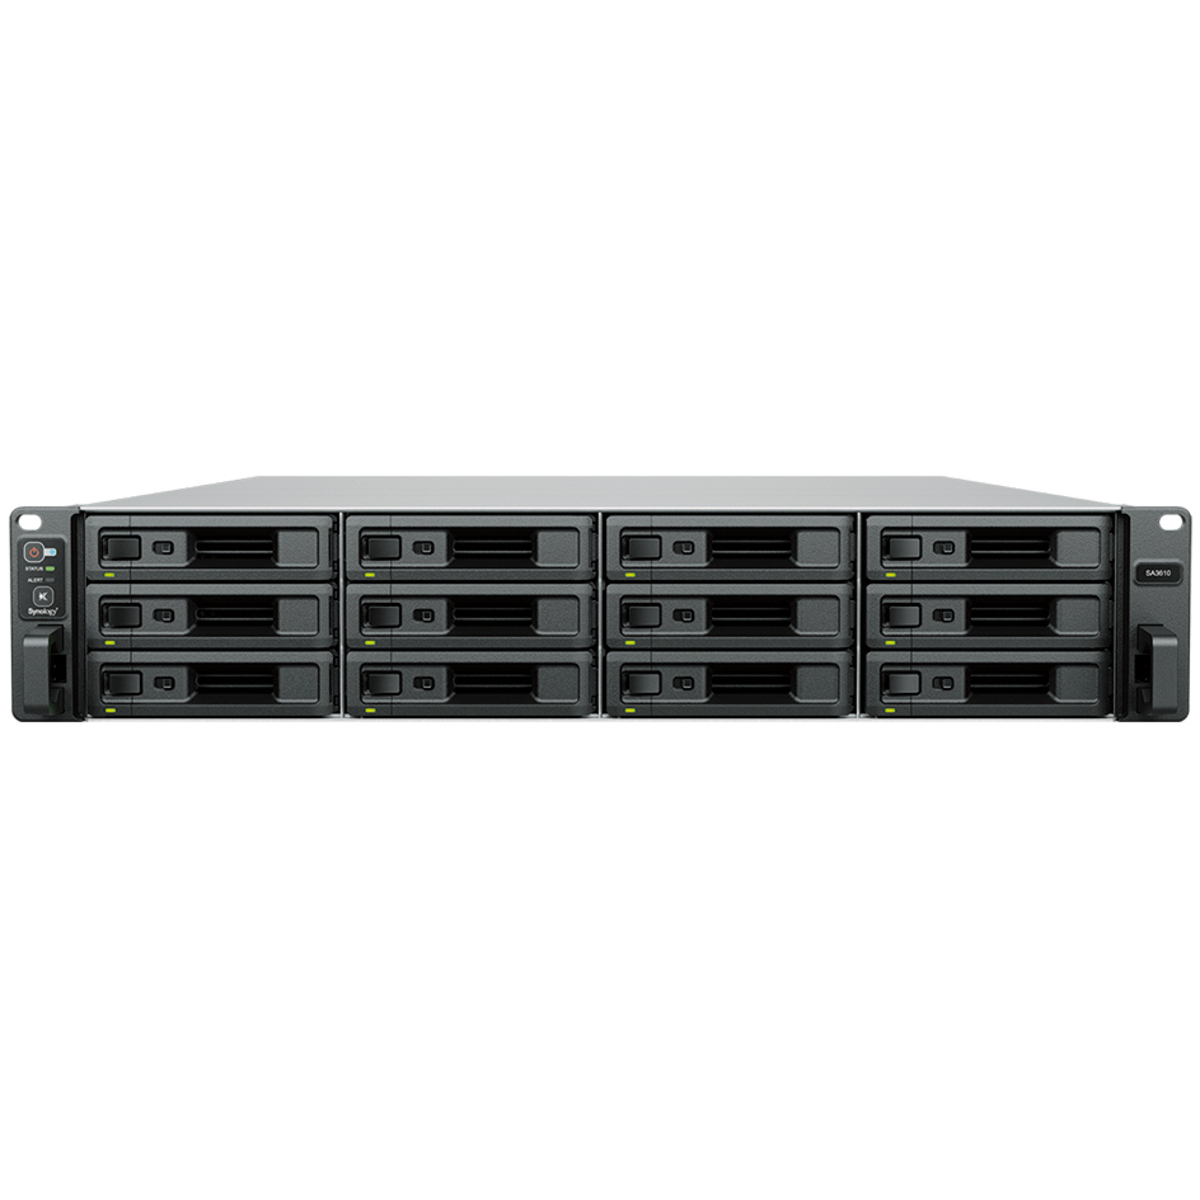 Synology RackStation SA3610 80tb 12-Bay RackMount Large Business / Enterprise NAS - Network Attached Storage Device 10x8tb Seagate IronWolf Pro ST8000NT001 3.5 7200rpm SATA 6Gb/s HDD NAS Class Drives Installed - Burn-In Tested - ON SALE RackStation SA3610